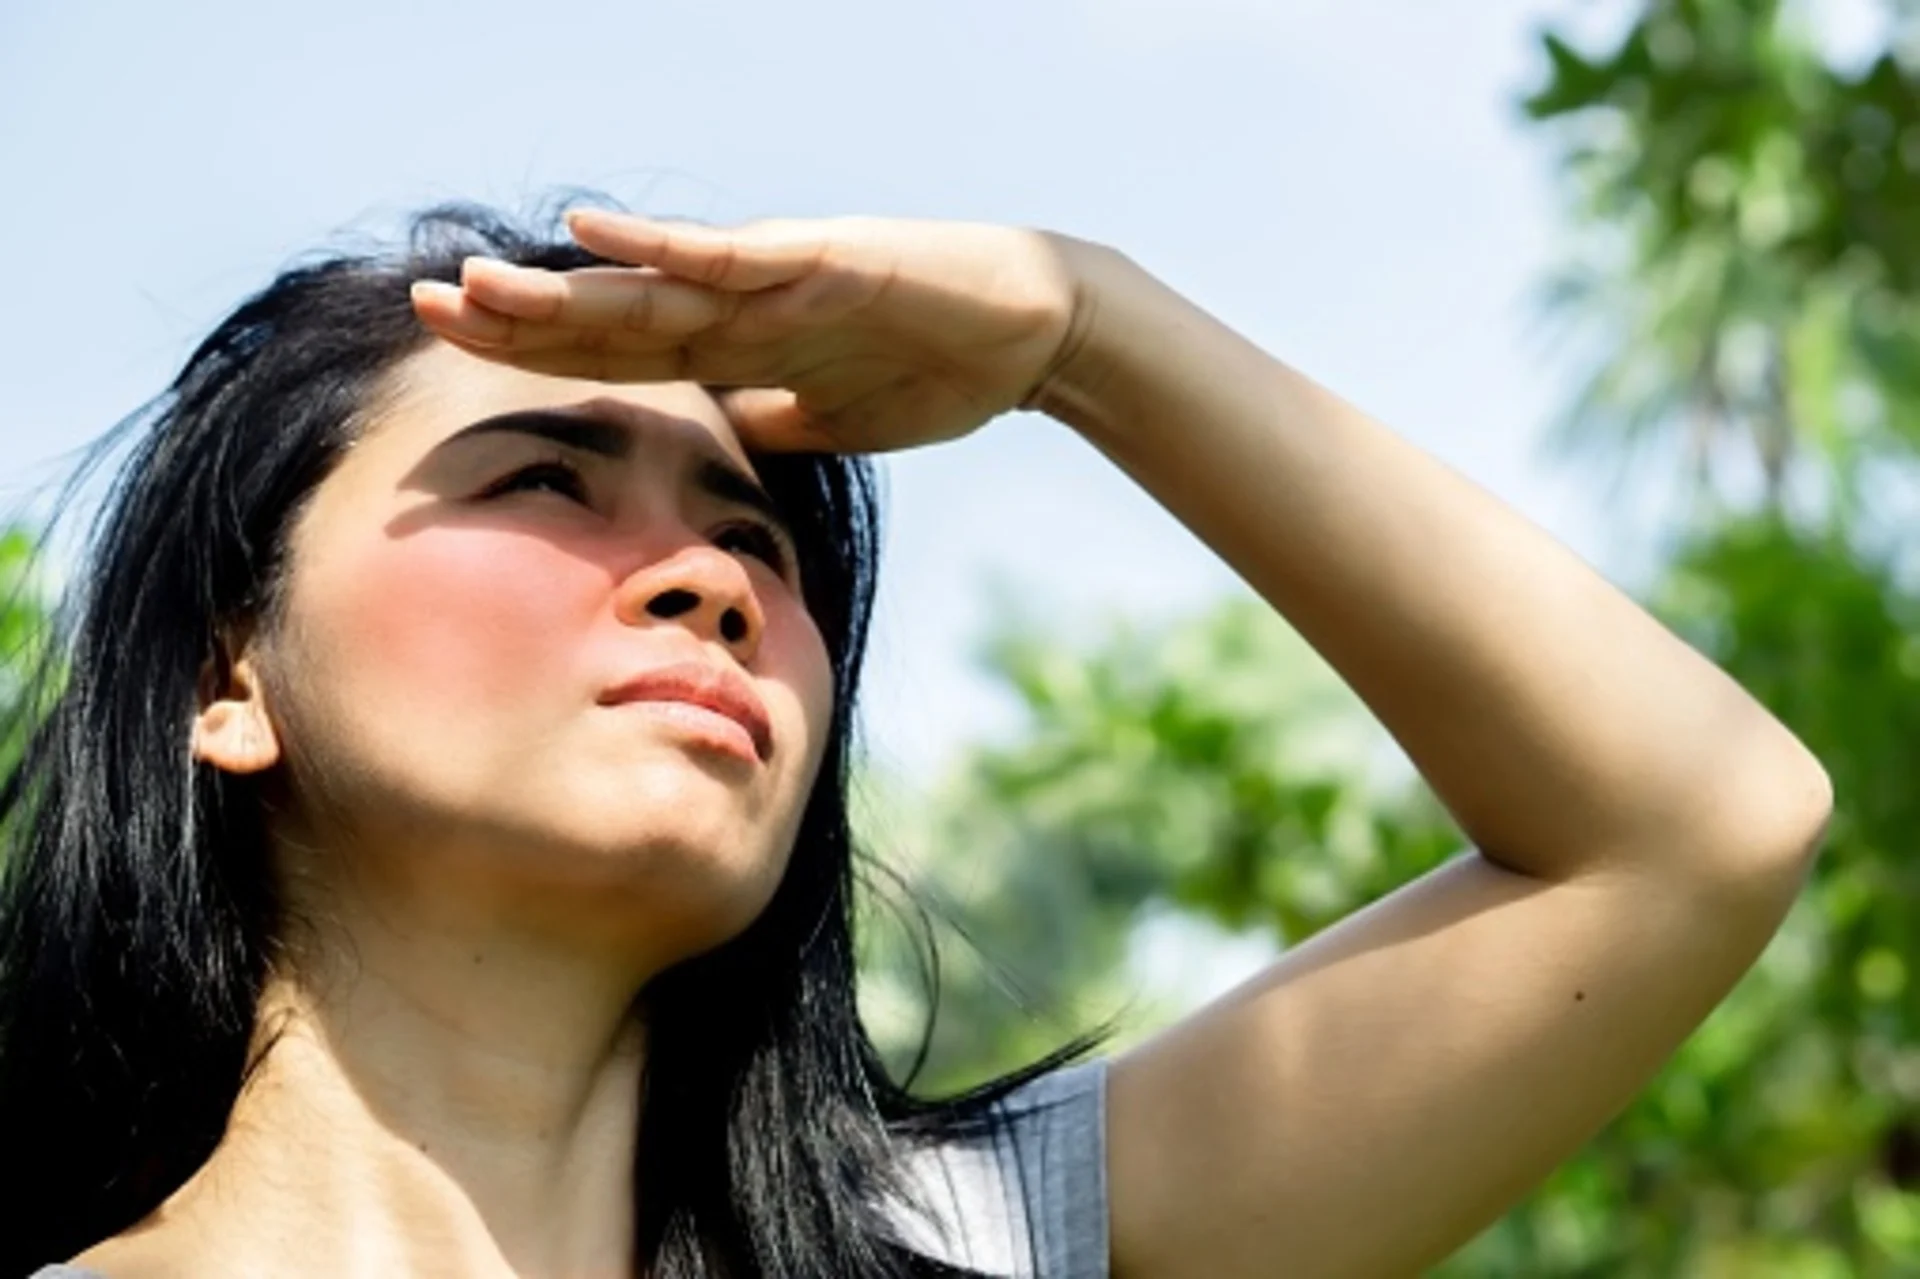 Getty Images. Credit: Doucefleur Creative #: 1313851761 | woman having problem sunburn redness on face skin hand cover her face to protect ultraviolet from sunlight - stock photo. Sun, sunshine, heat. Credit:	Doucefleur Creative #:	1313851761. Link: https://www.gettyimages.ca/detail/photo/asian-woman-having-problem-sunburn-redness-on-face-royalty-free-image/1313851761?phrase=trouble+seeing+in+sun&adppopup=true